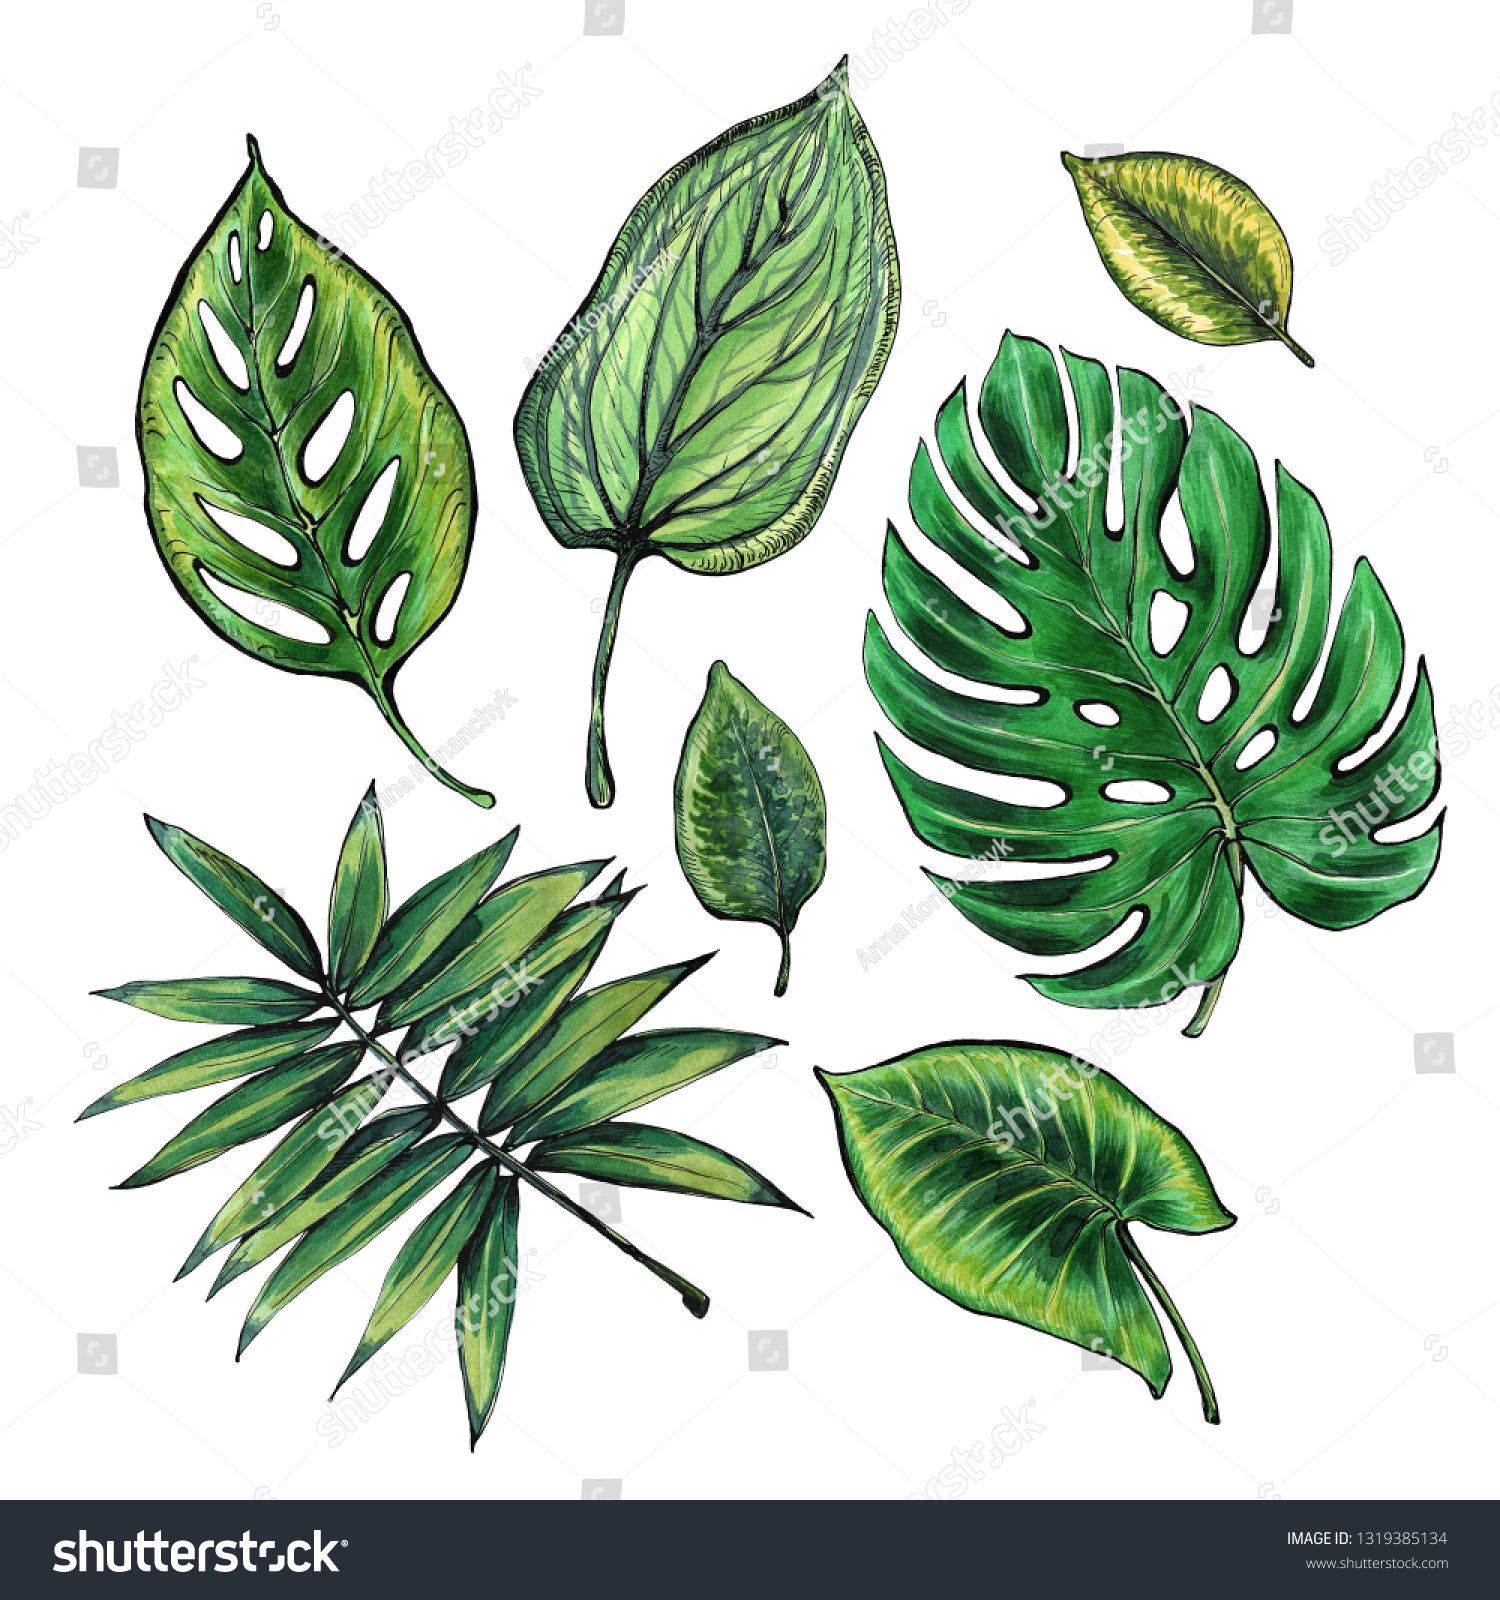 Set of tropical leaves. Watercolor and graphics handmade. #1319385134